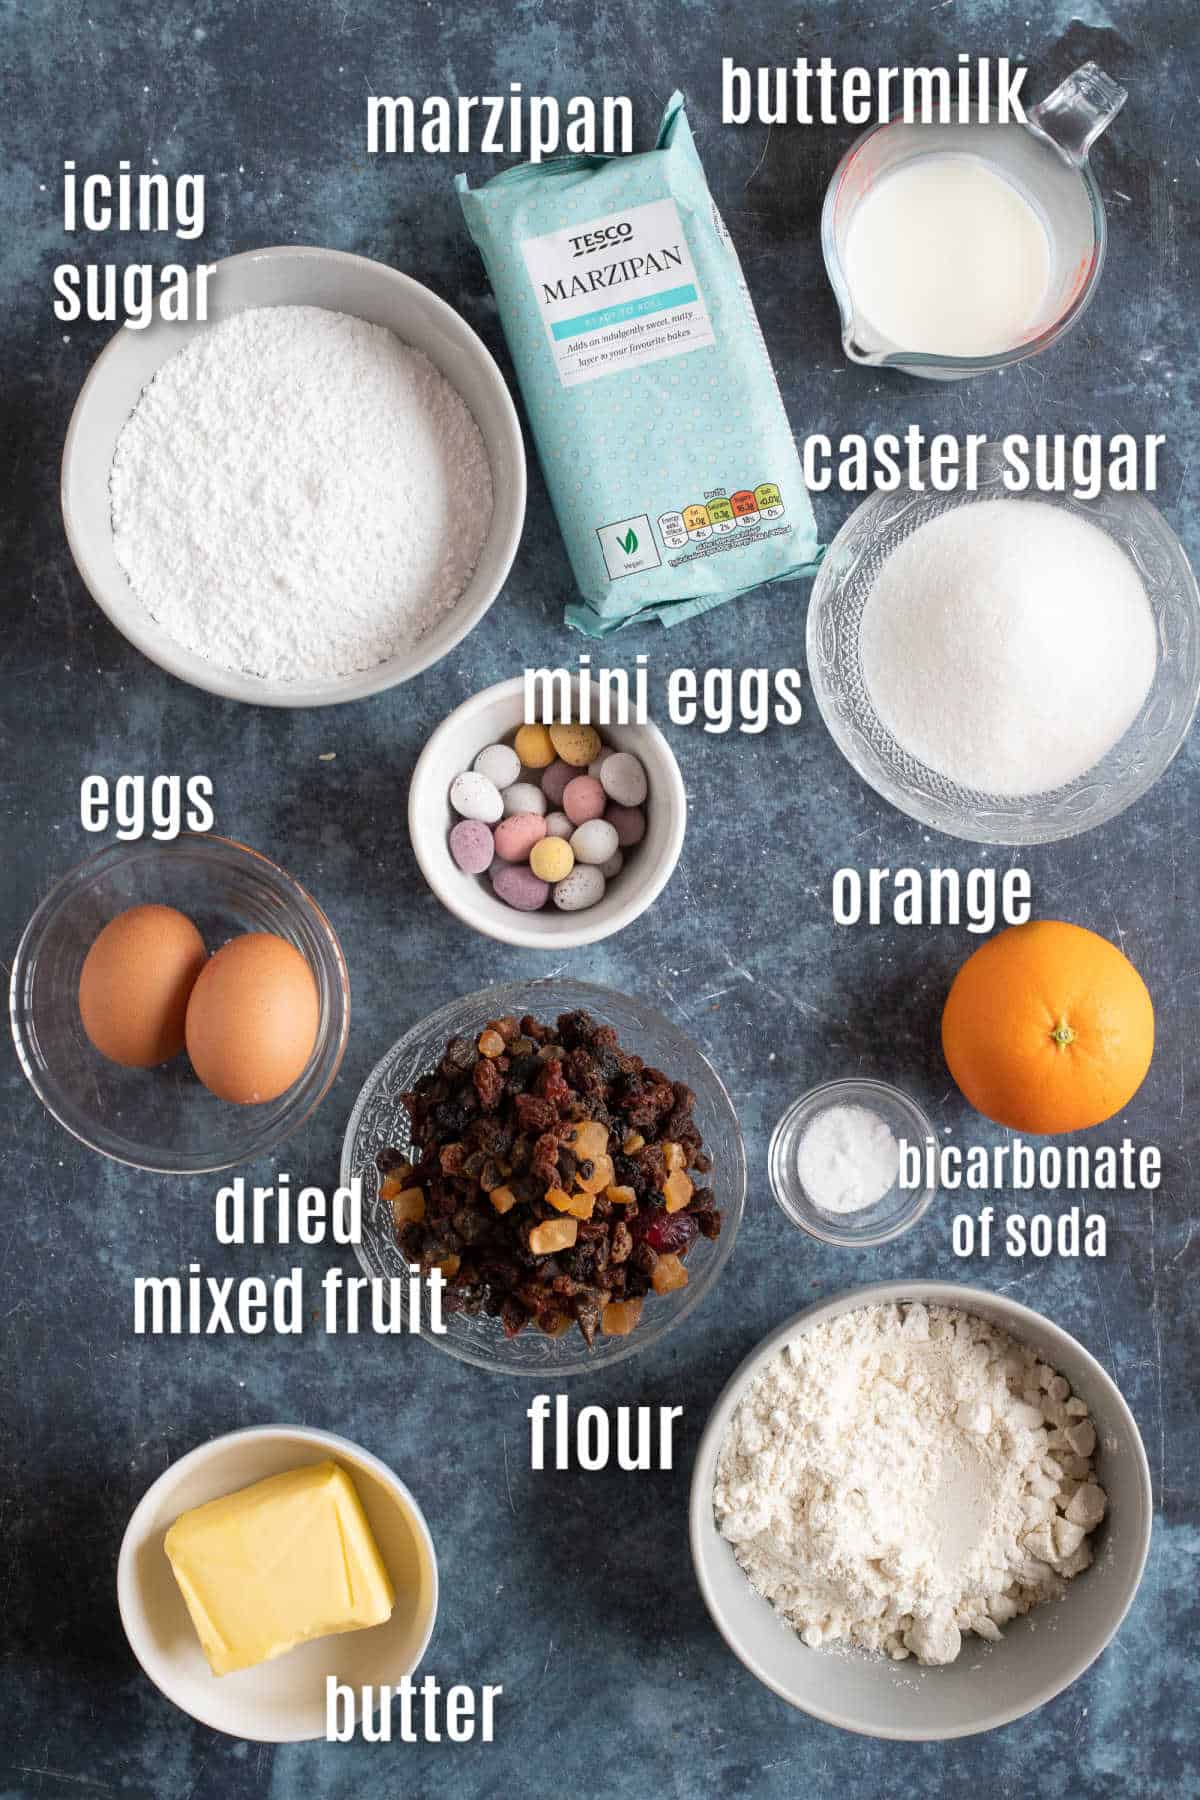 Ingredients to make Easter simnel cake muffins.